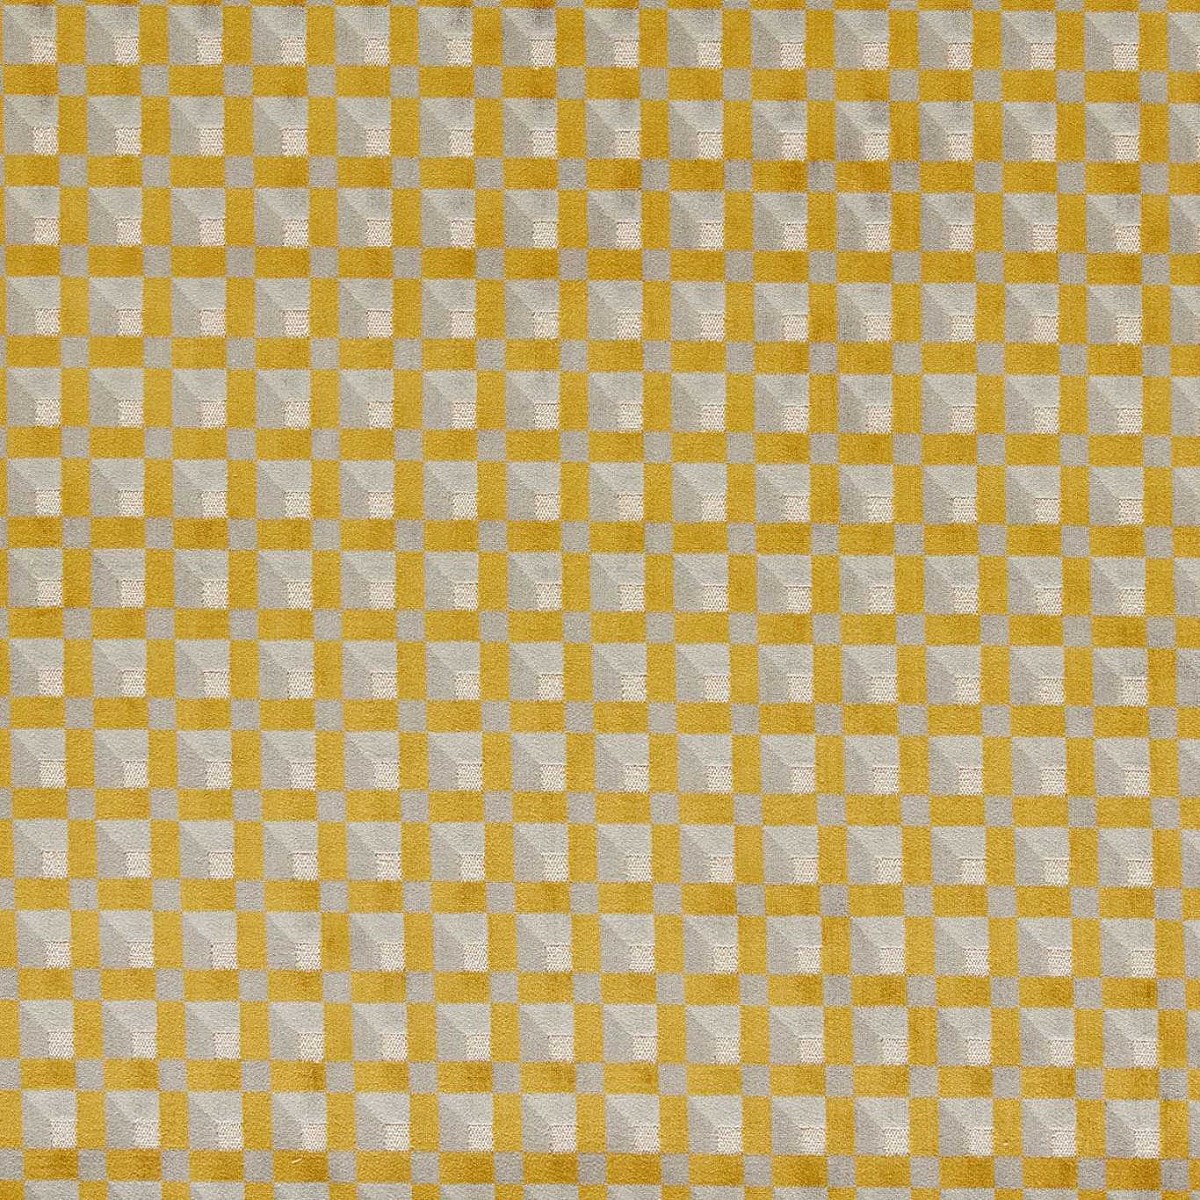 Blocks Nectar/Sketched/Diffused Light Fabric by Harlequin